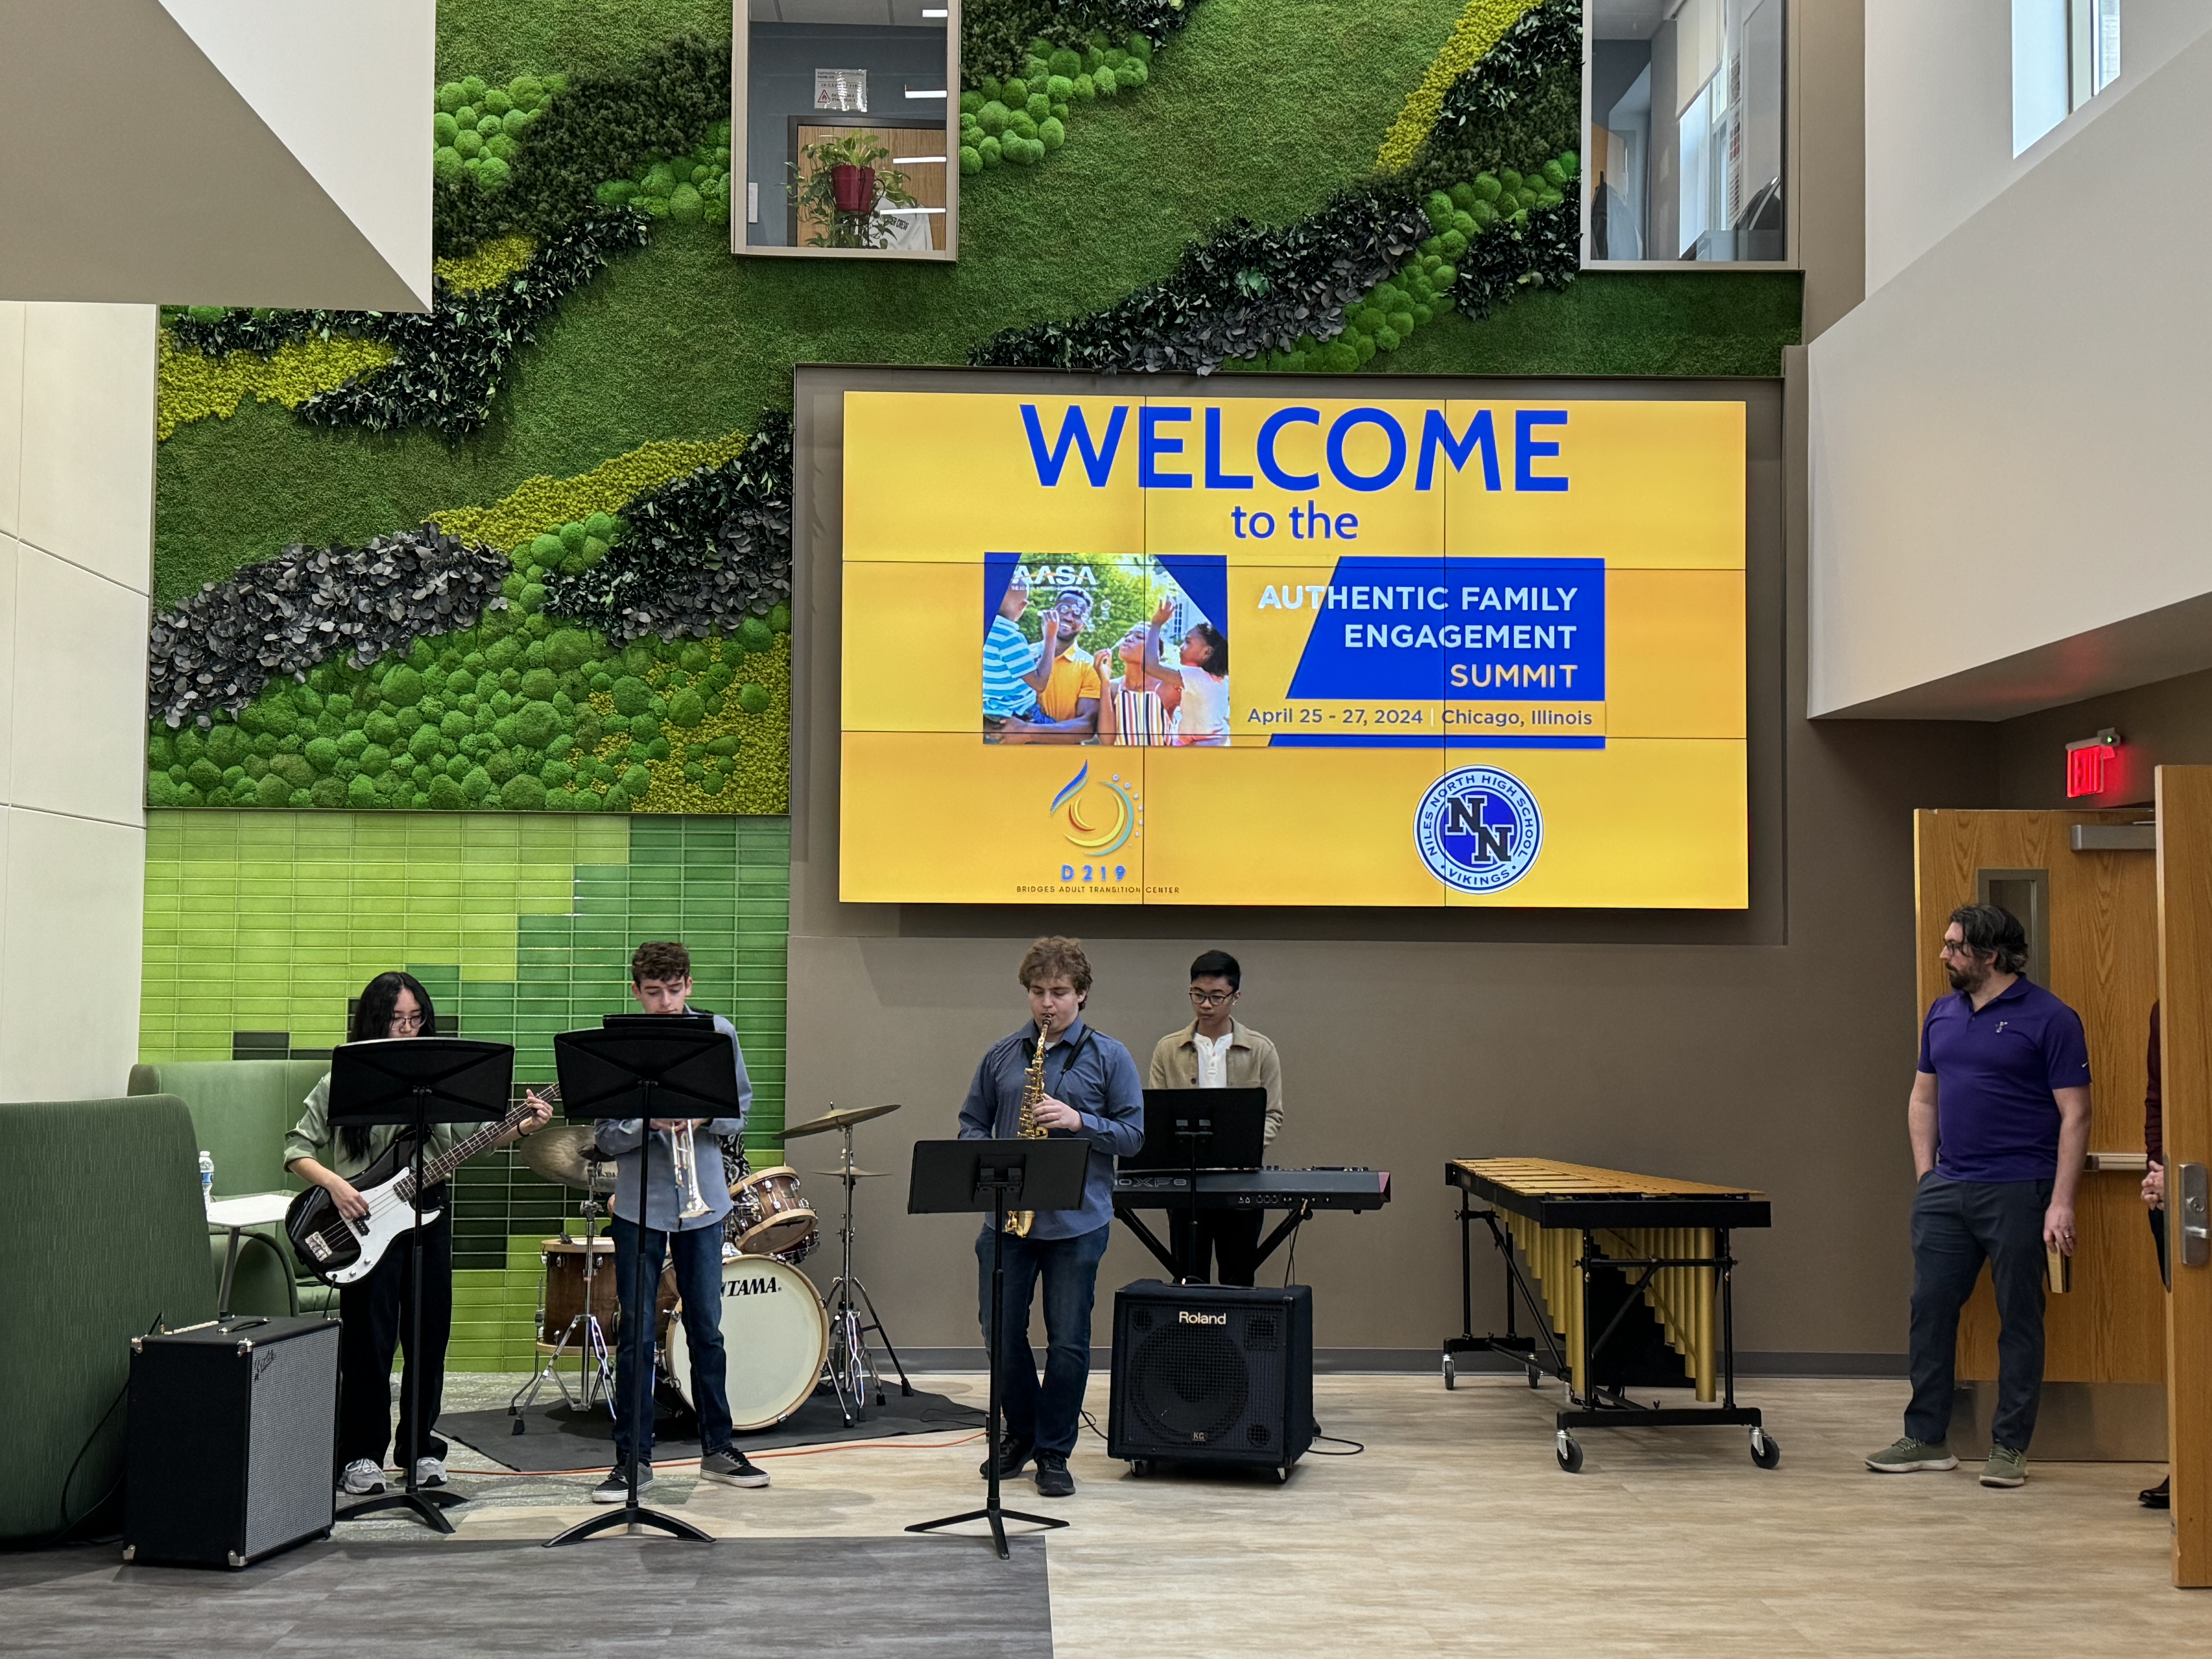 Student band players welcoming attendees to the building